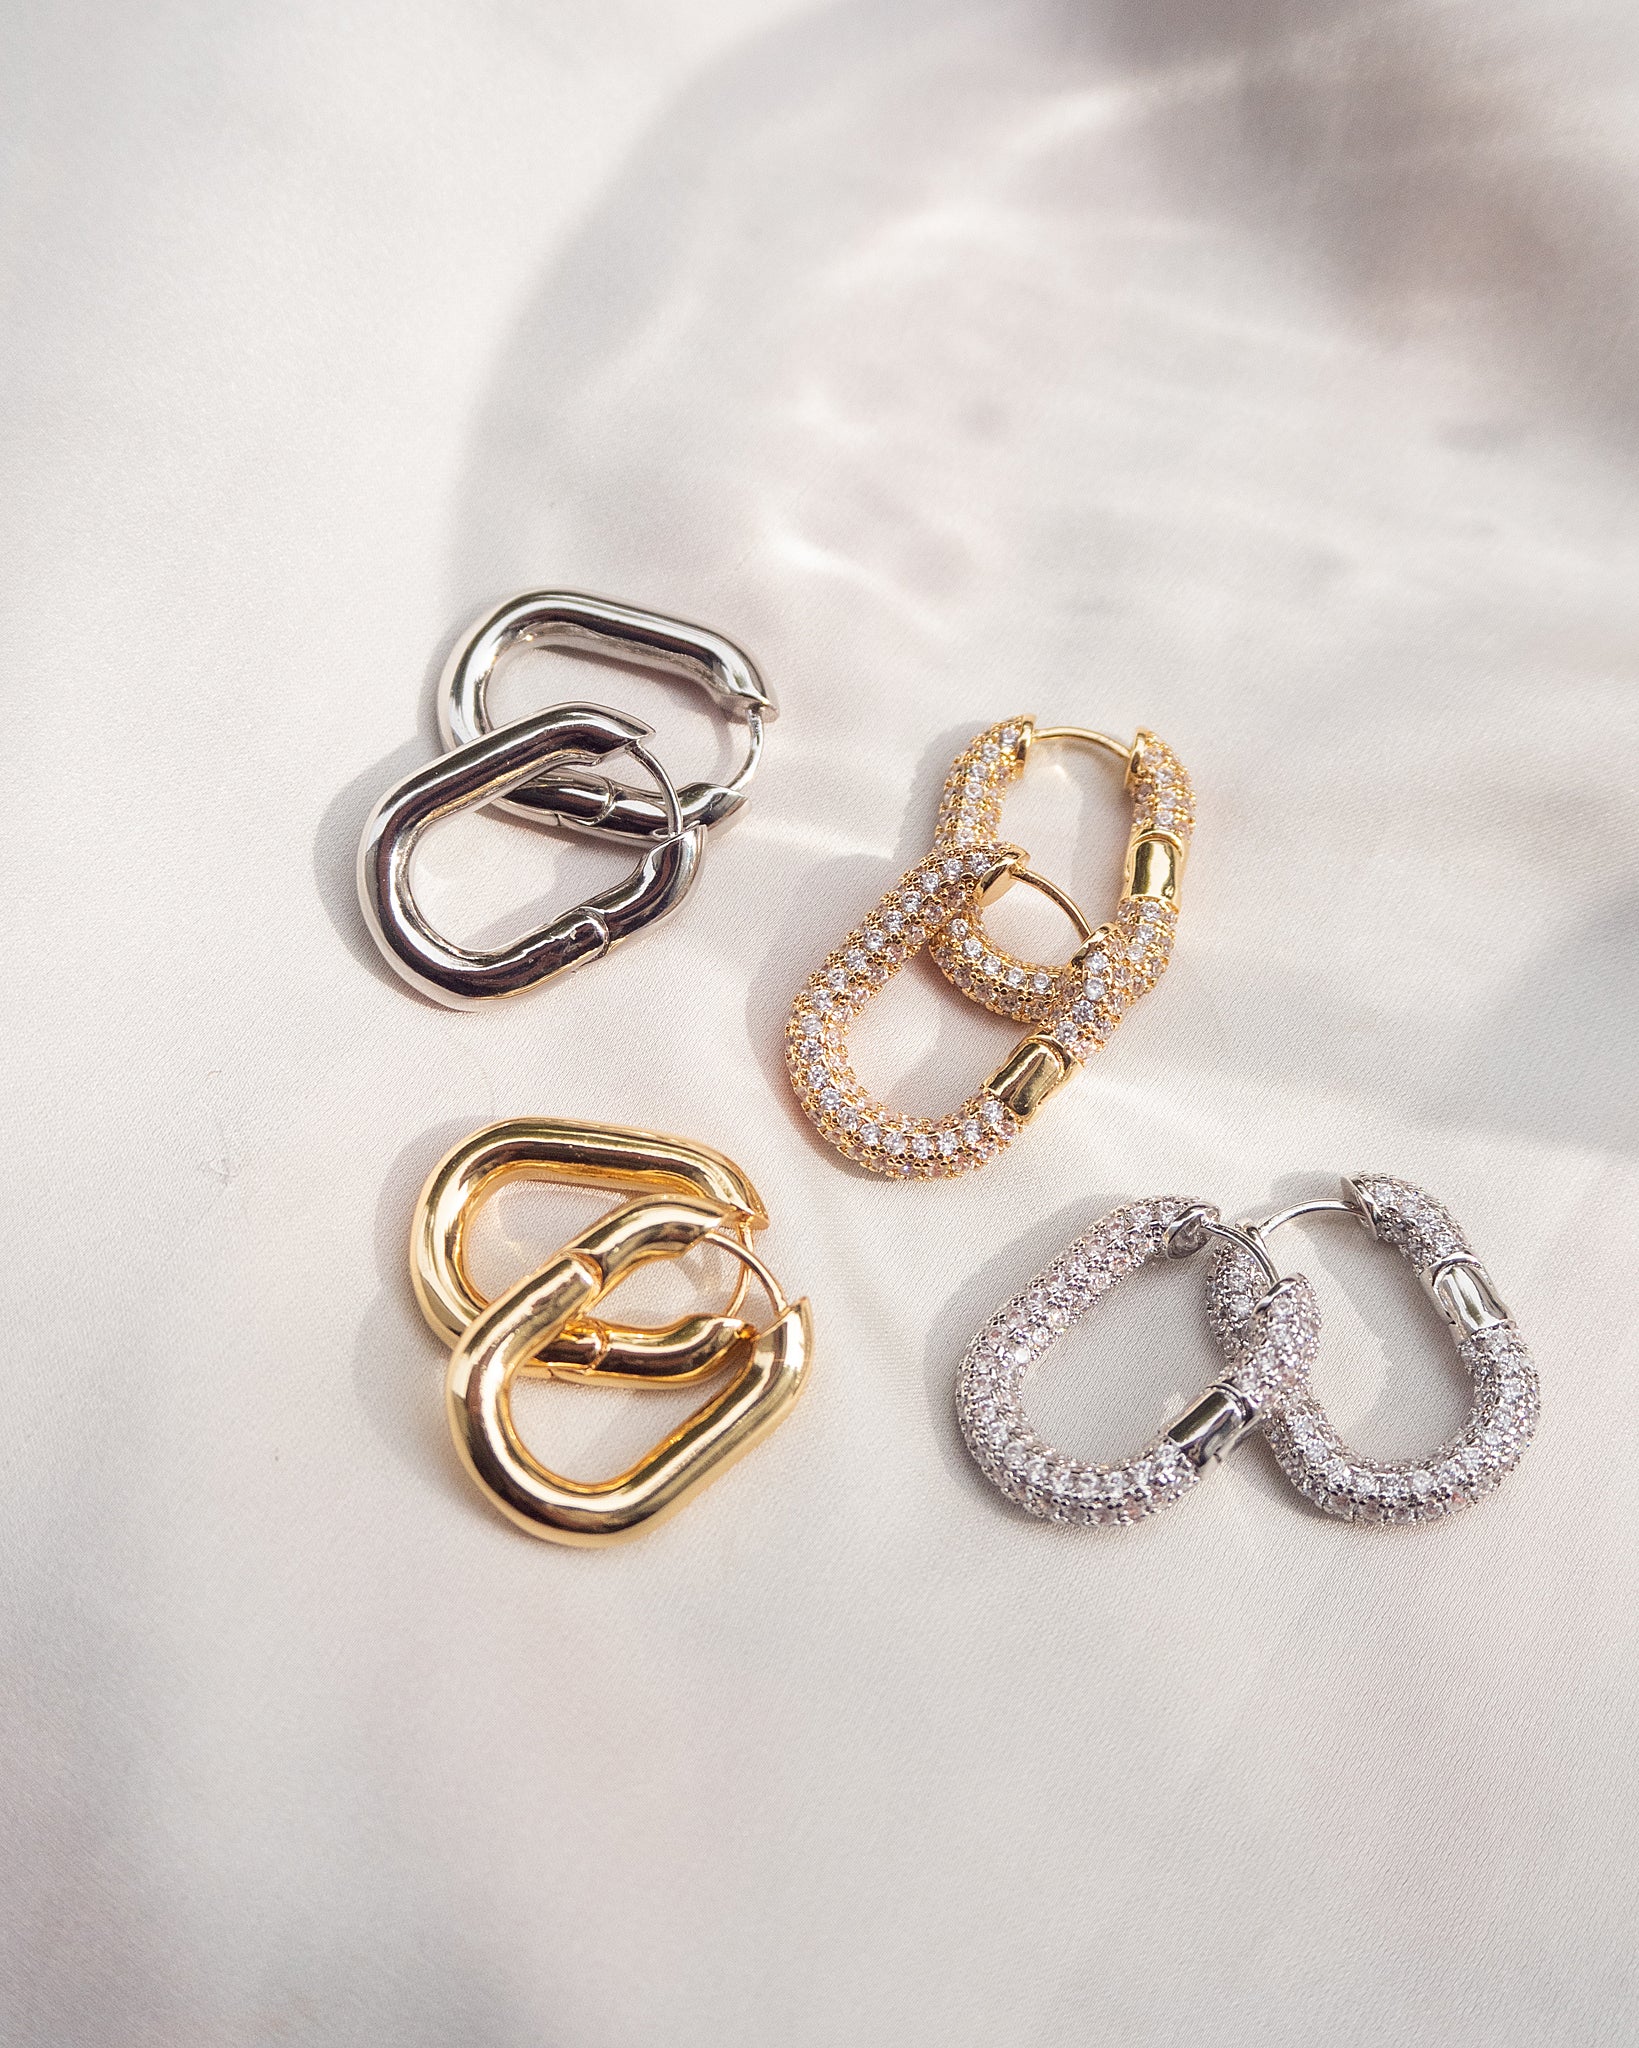 Luv Aj Pave Chain Link Huggie Hoop Earrings in CZ and Polished Gold Plated